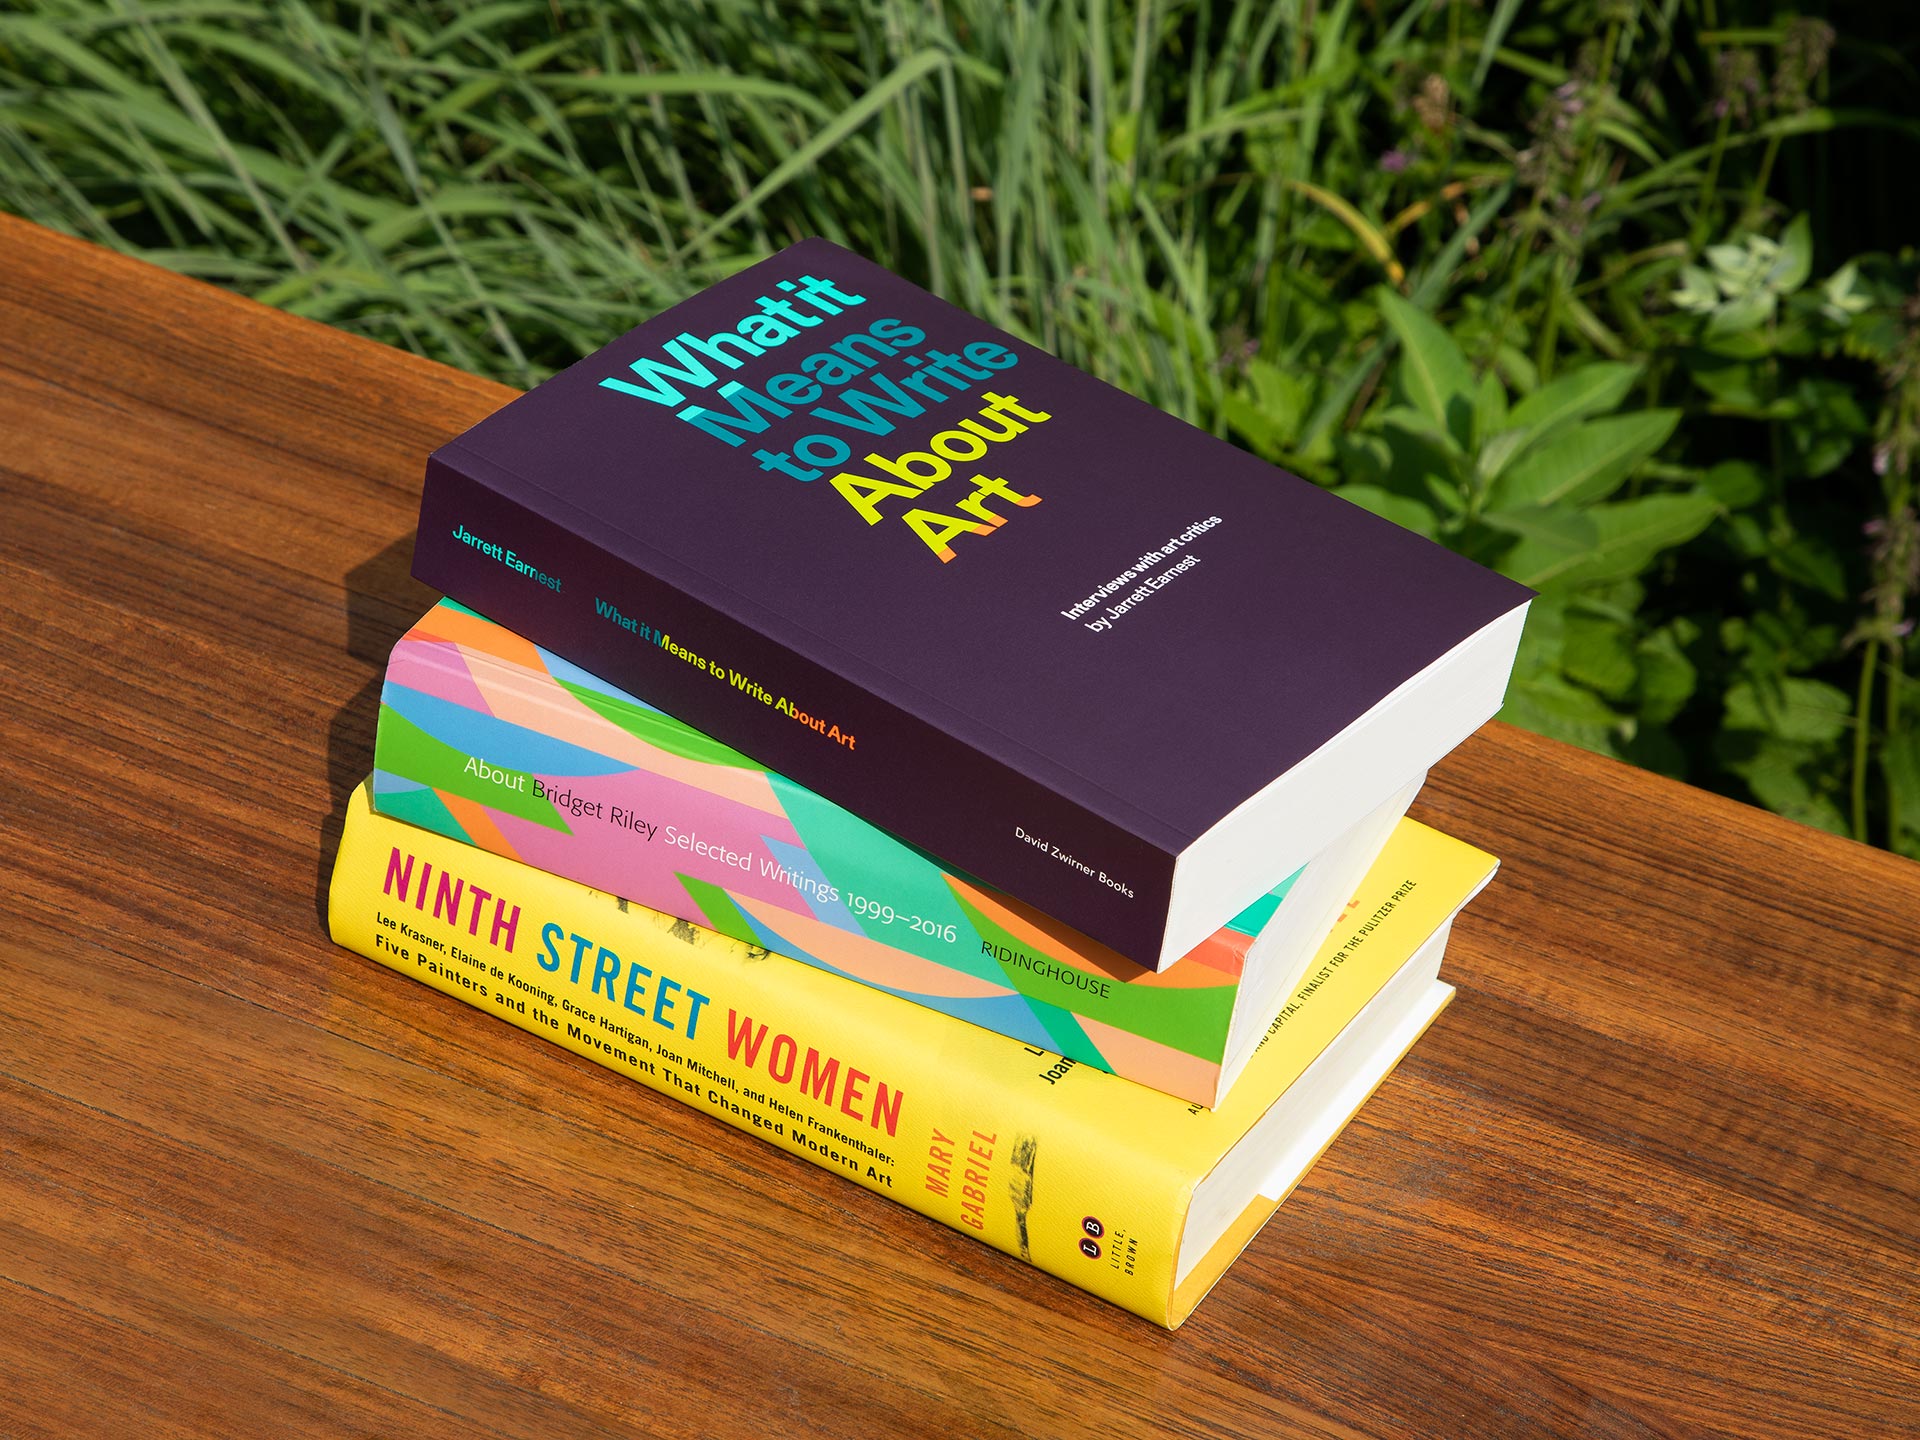 A photograph of three books stacked on a bench outside. The titles are: What it Means to Write About Art: Interviews with art critics; About Bridget Riley: Selected Writings 1999–2016; Ninth Street Women: Lee Krasner, Elaine De Kooning, Grace.